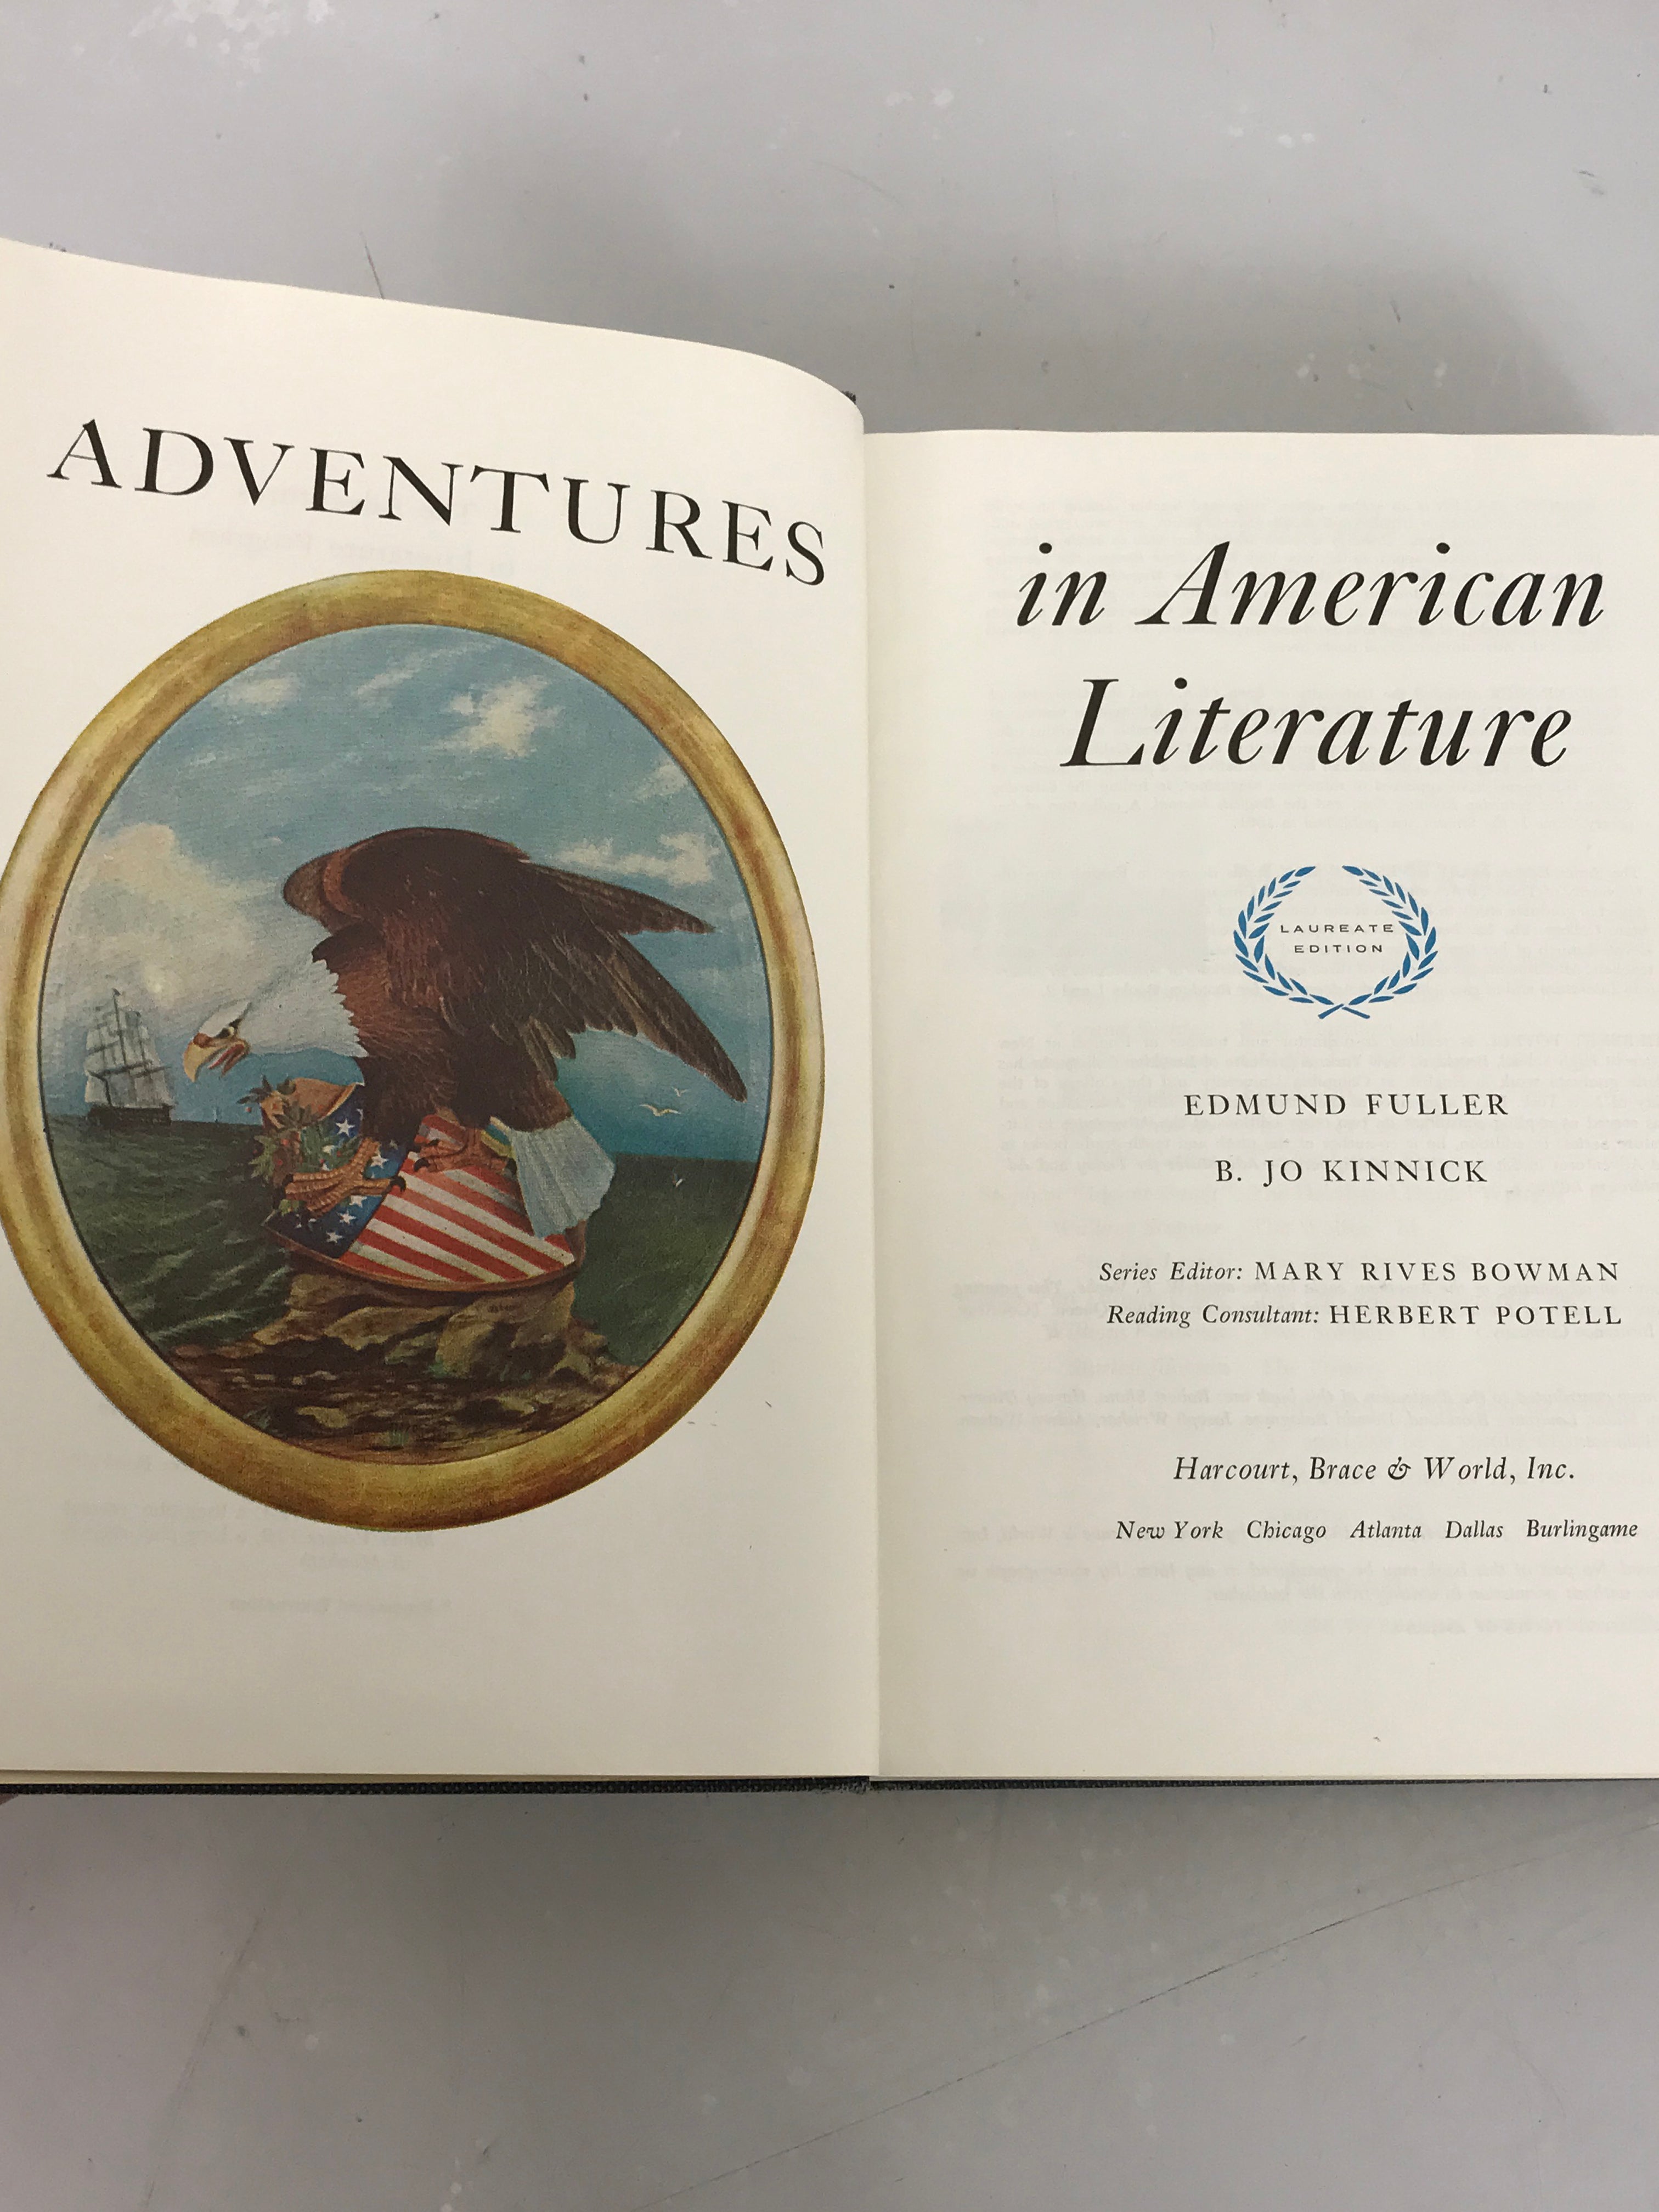 Lot of 2: History of a Free People/Adventures in American Literature HC